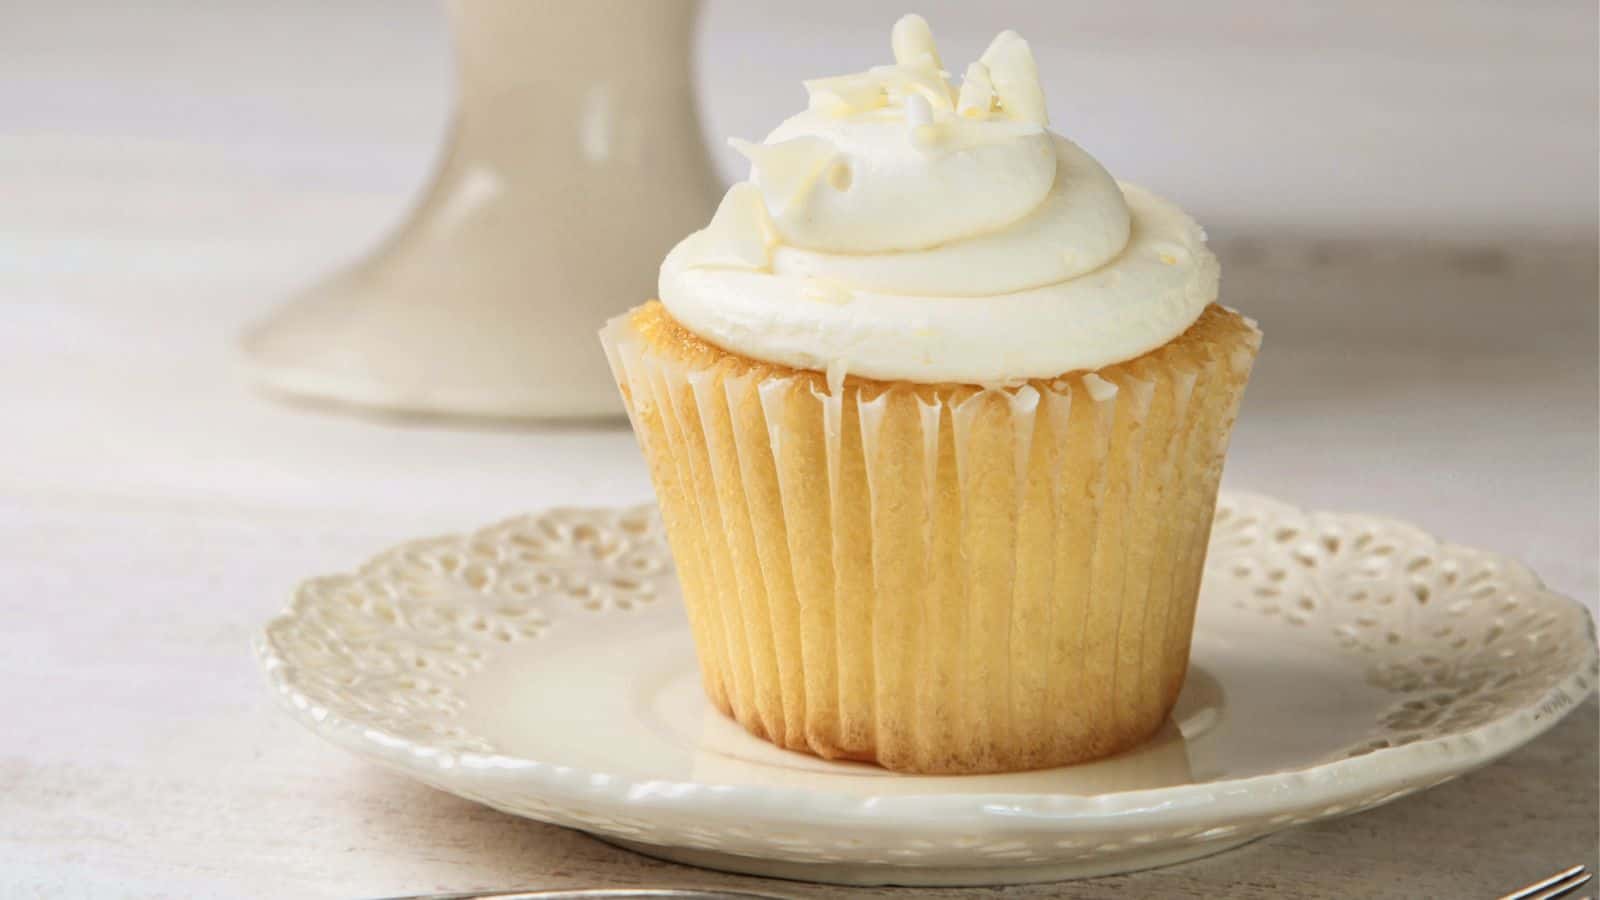 Vanilla cupcake with frosting on white china plate.